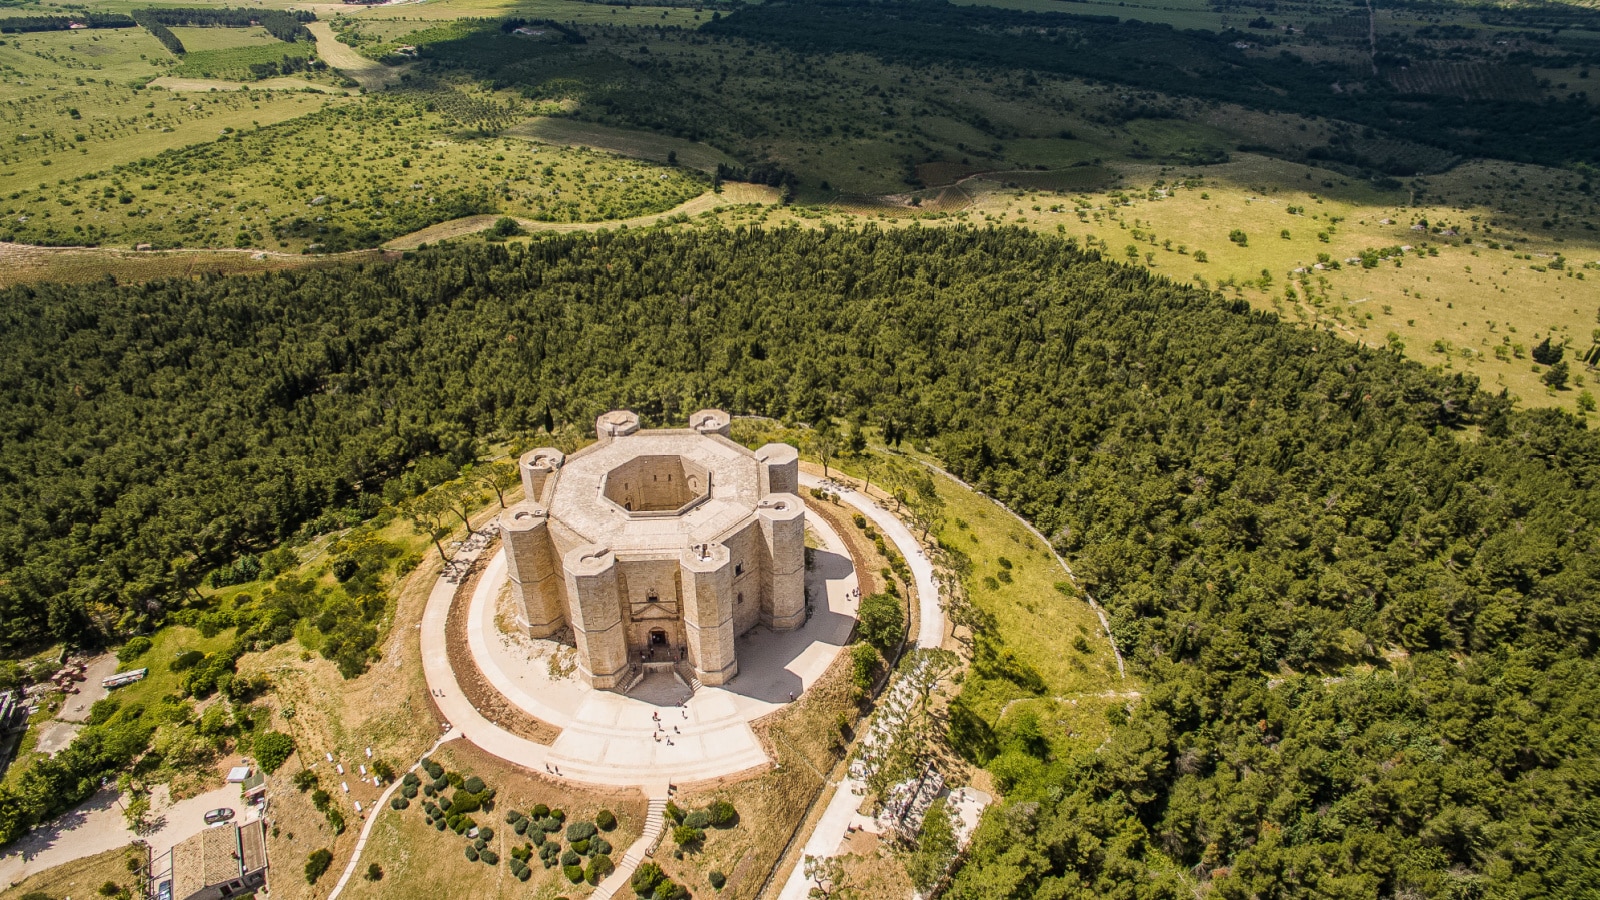 Aerial view of Castel del Monte (Castle on the Mountain). It was a Norman castle wanted by Frederick the 2nd in Puglia, Italy.